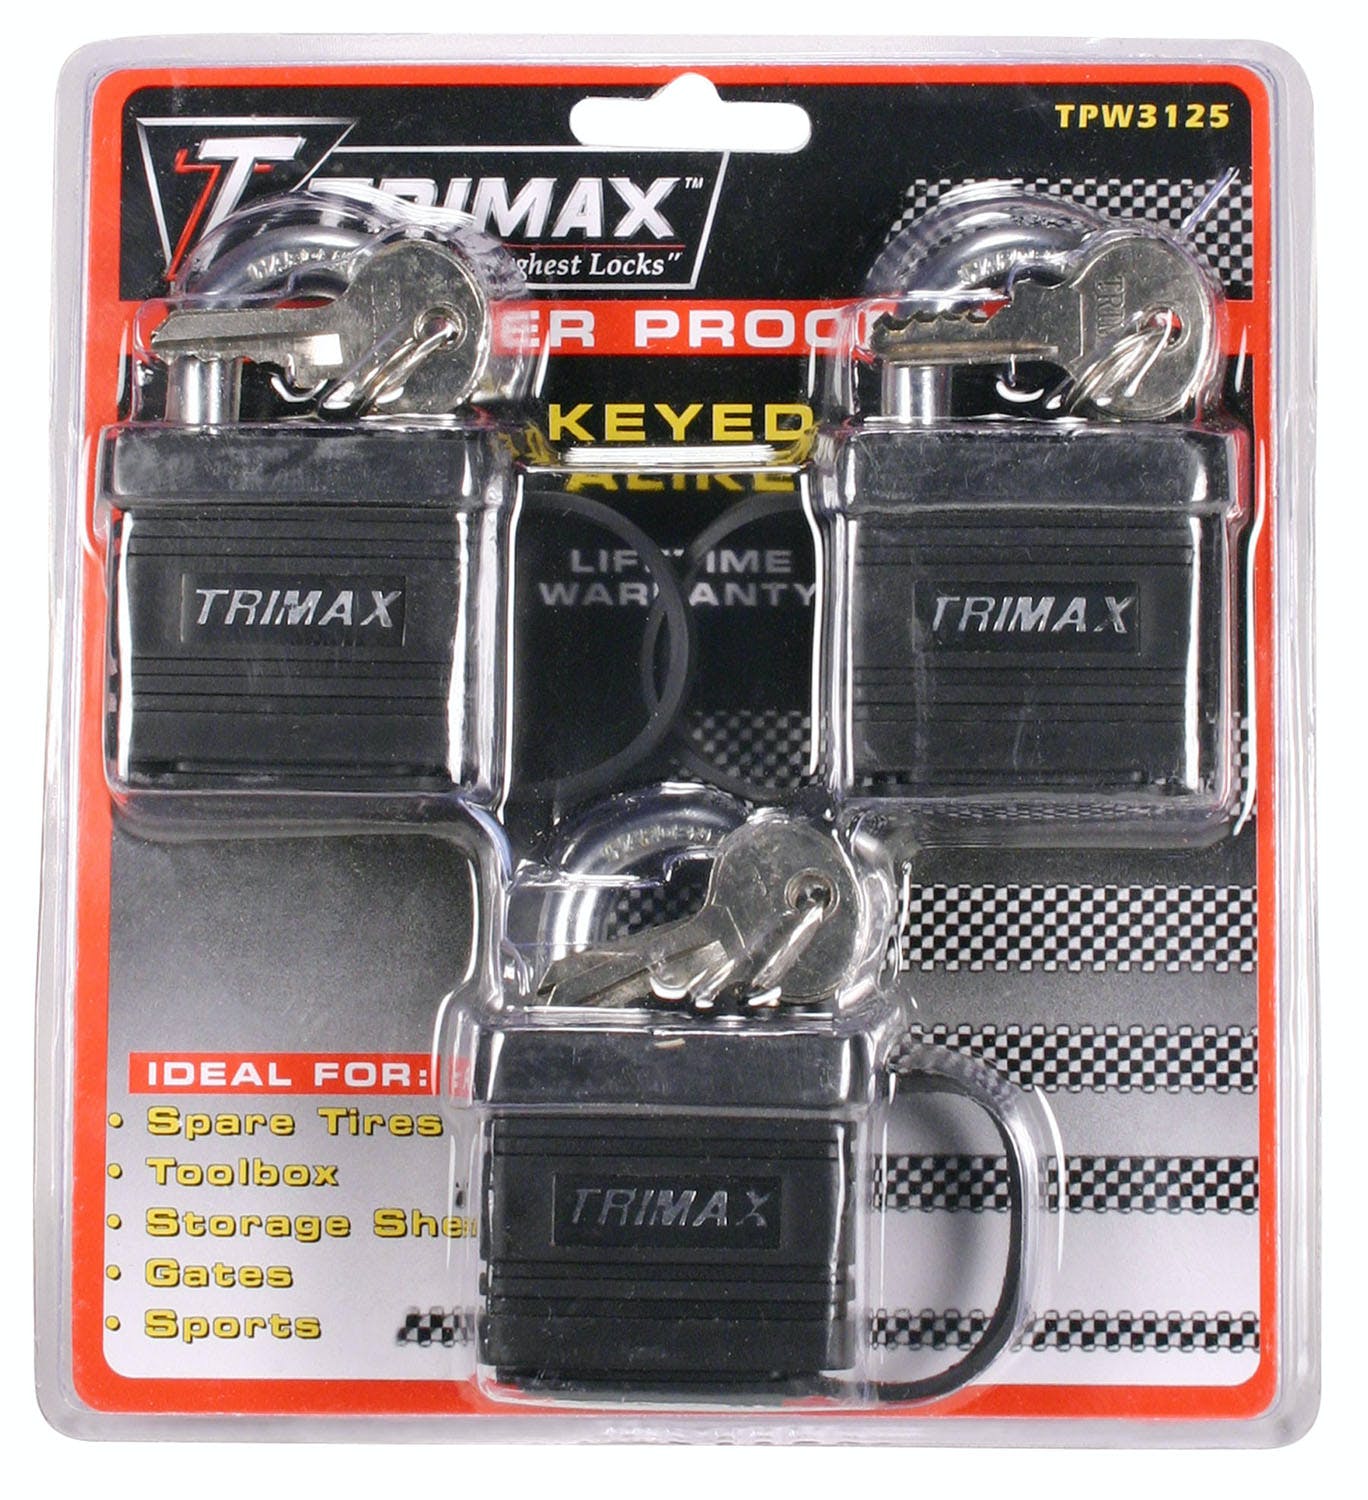 TRIMAX TPW3125 3 Pack Of Keyed -Alike Tpw1125 Weather Proof Padlocks